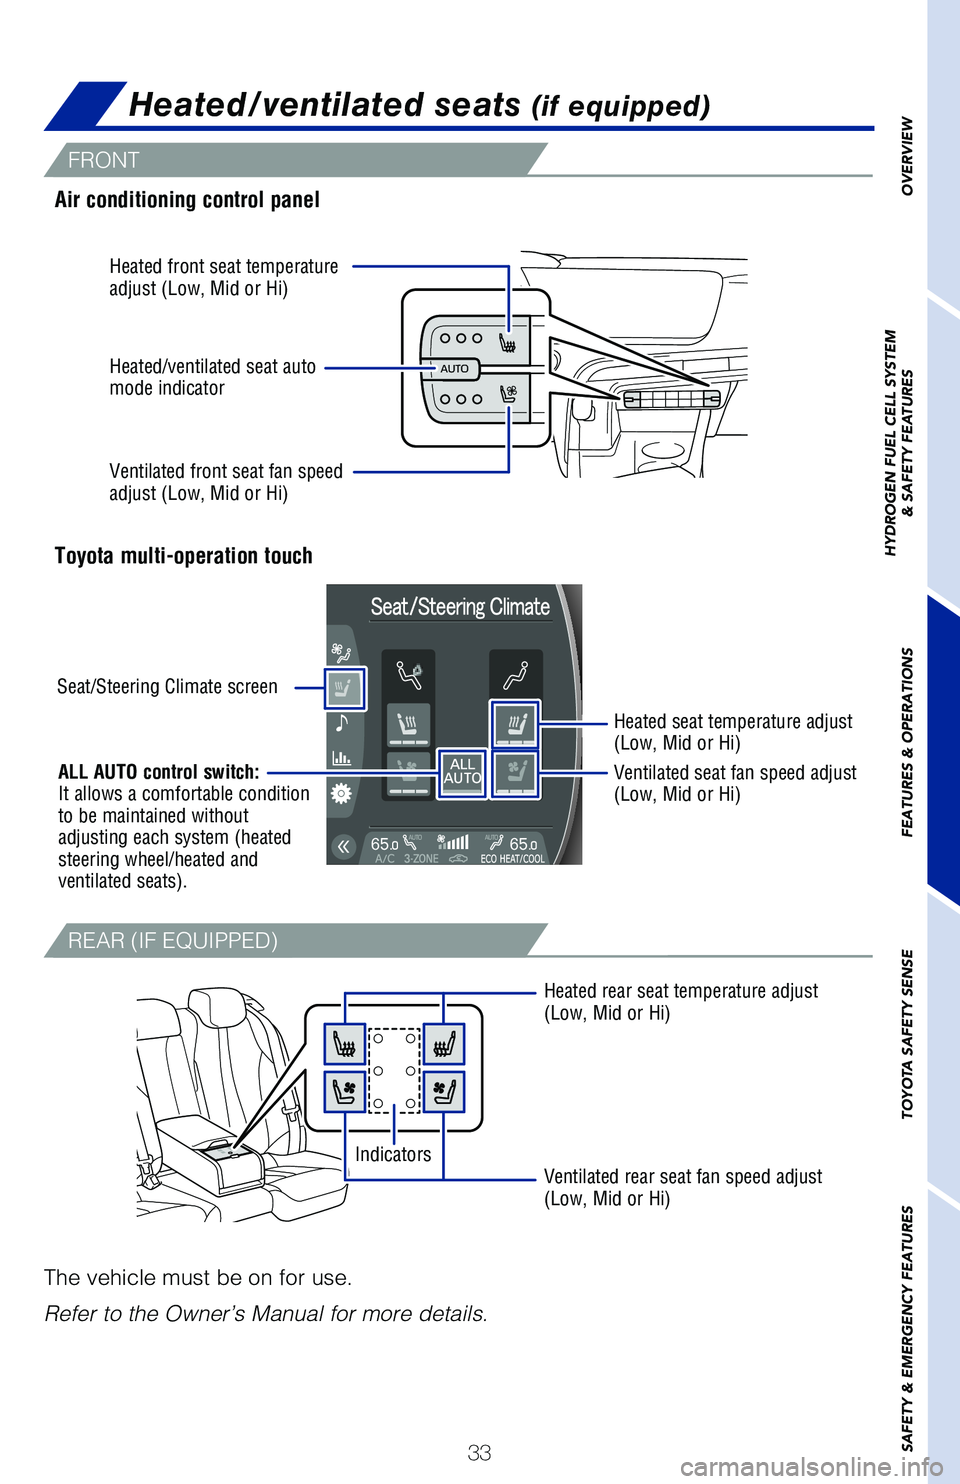 TOYOTA MIRAI 2021  Owners Manual (in English) 33
OVERVIEW
HYDROGEN FUEL CELL SYSTEM
& SAFETY FEATURES
FEATURES & OPERATIONS
TOYOTA SAFETY SENSE
SAFETY & EMERGENCY FEATURESAir conditioning control panel
Toyota multi-operation touch
Heated rear sea